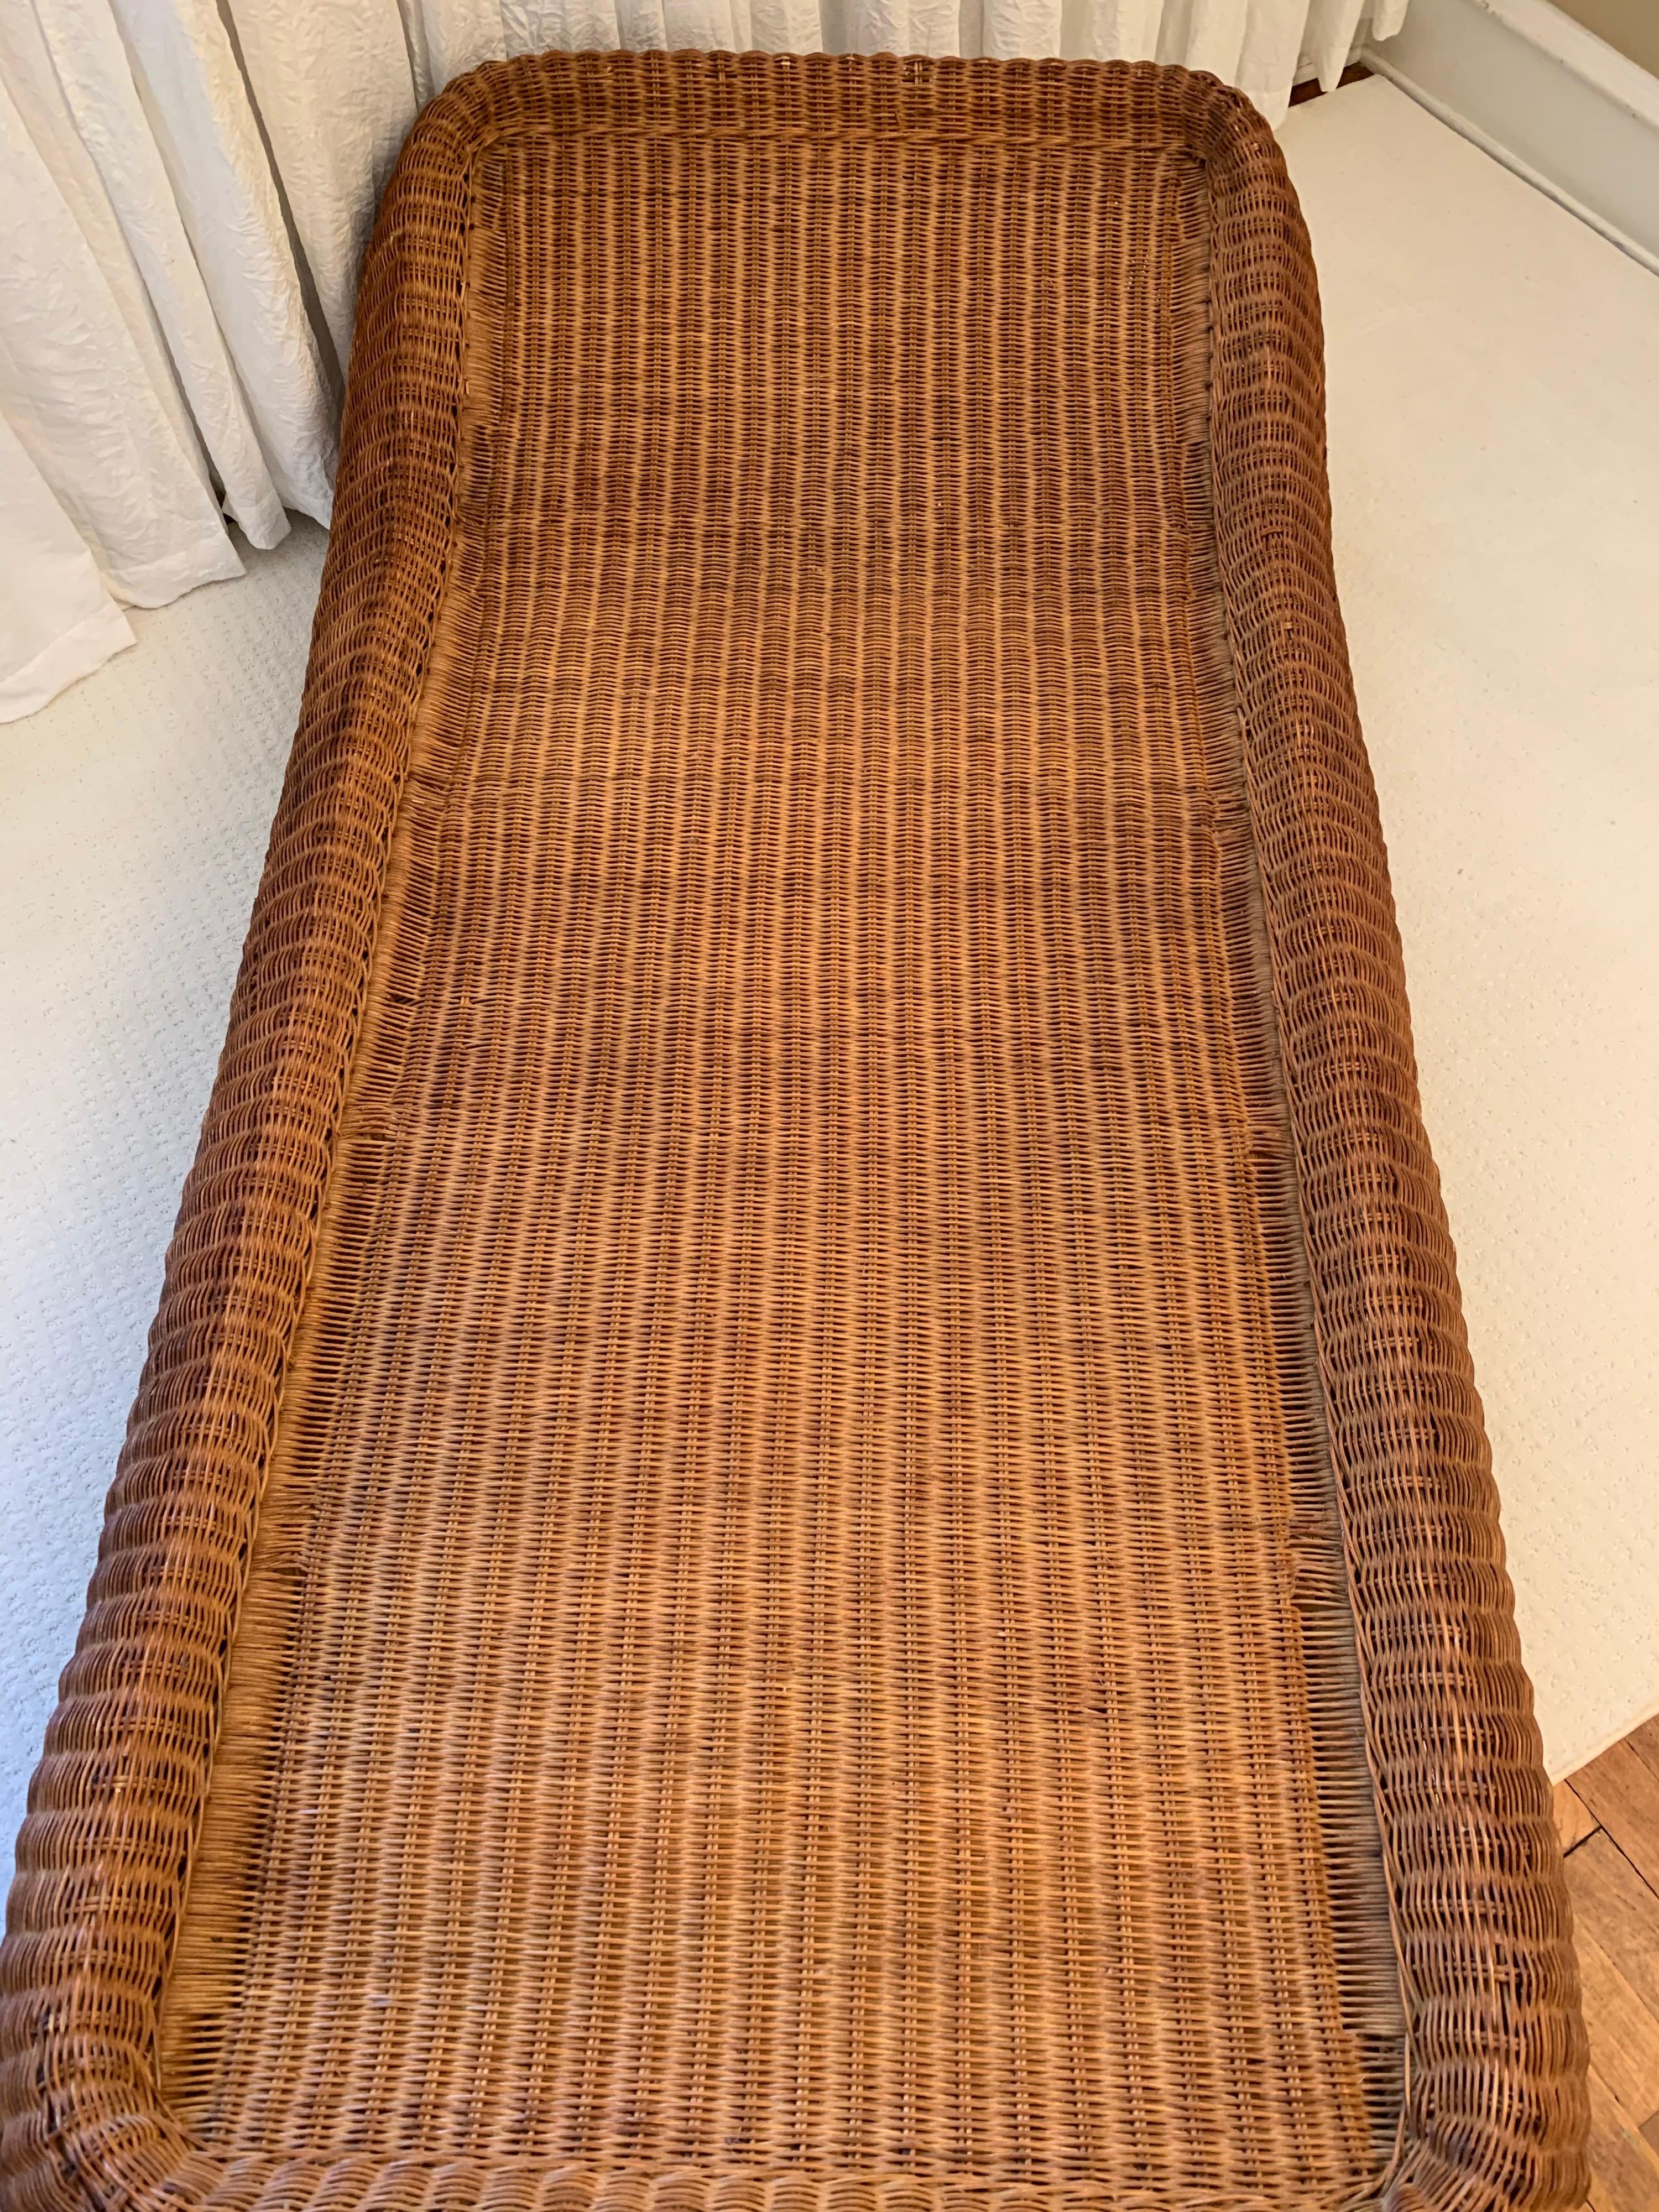 Vintage Handwoven Wicker Chaise Lounge, 1970’s 3